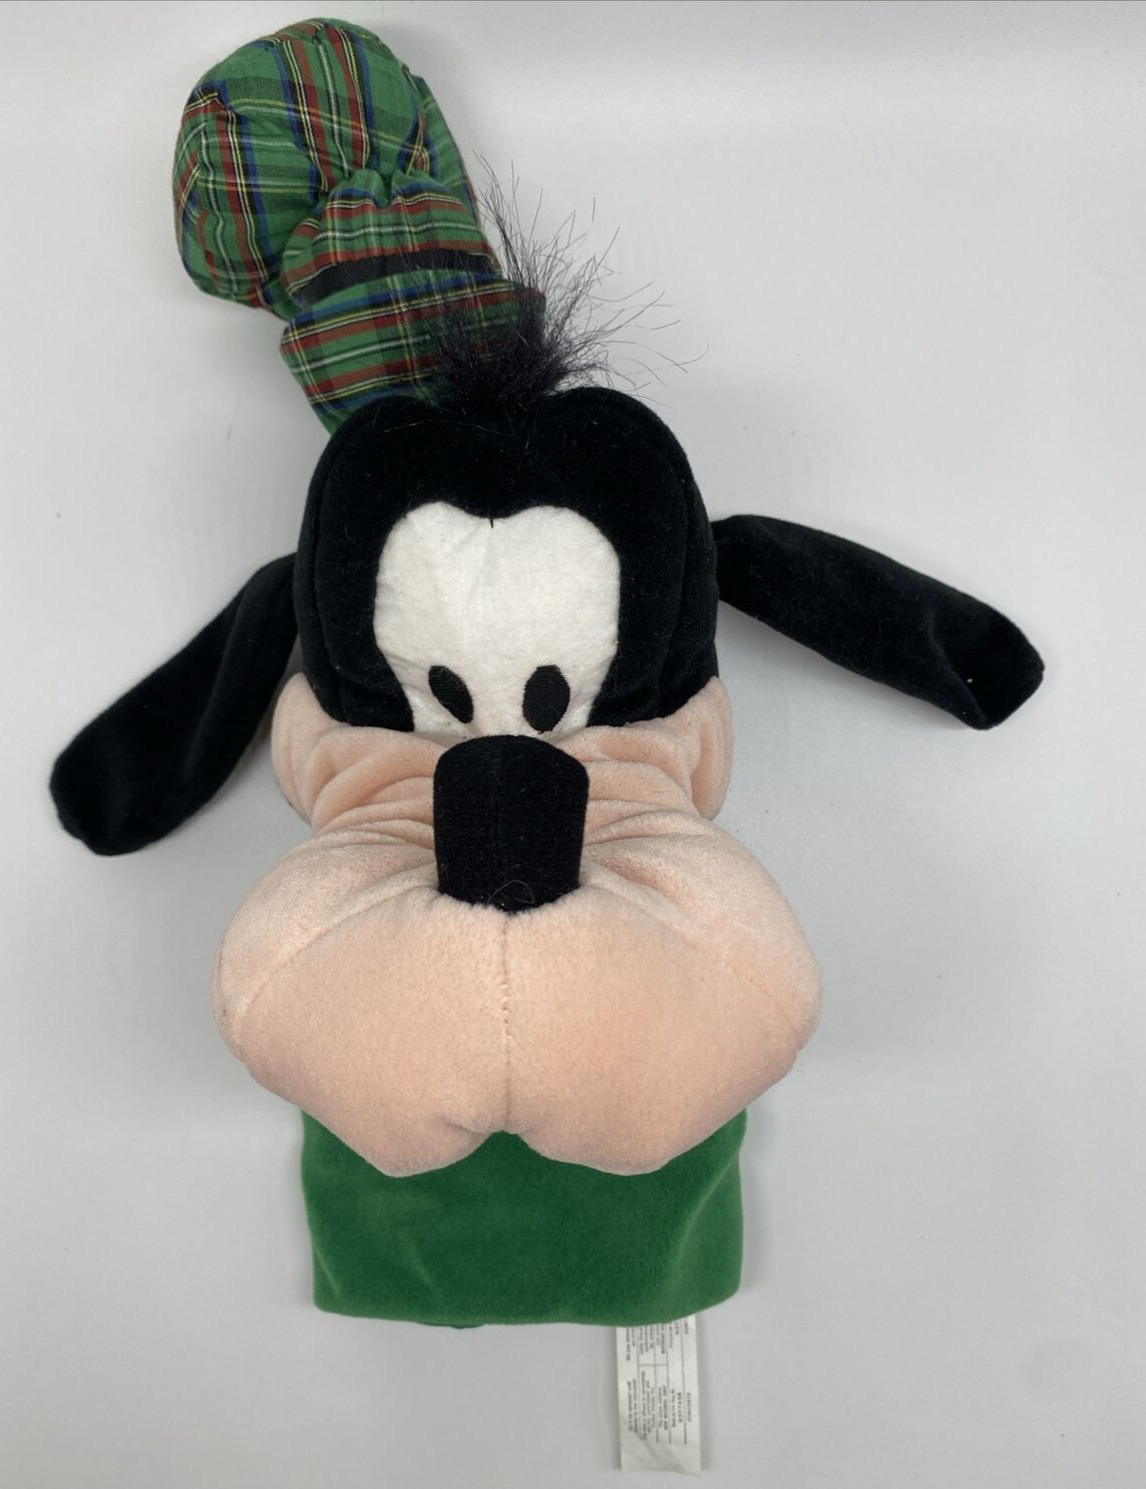 Vintage Disney Goofy Golf Club Cover ~ Hard To Find ~ Good Condition